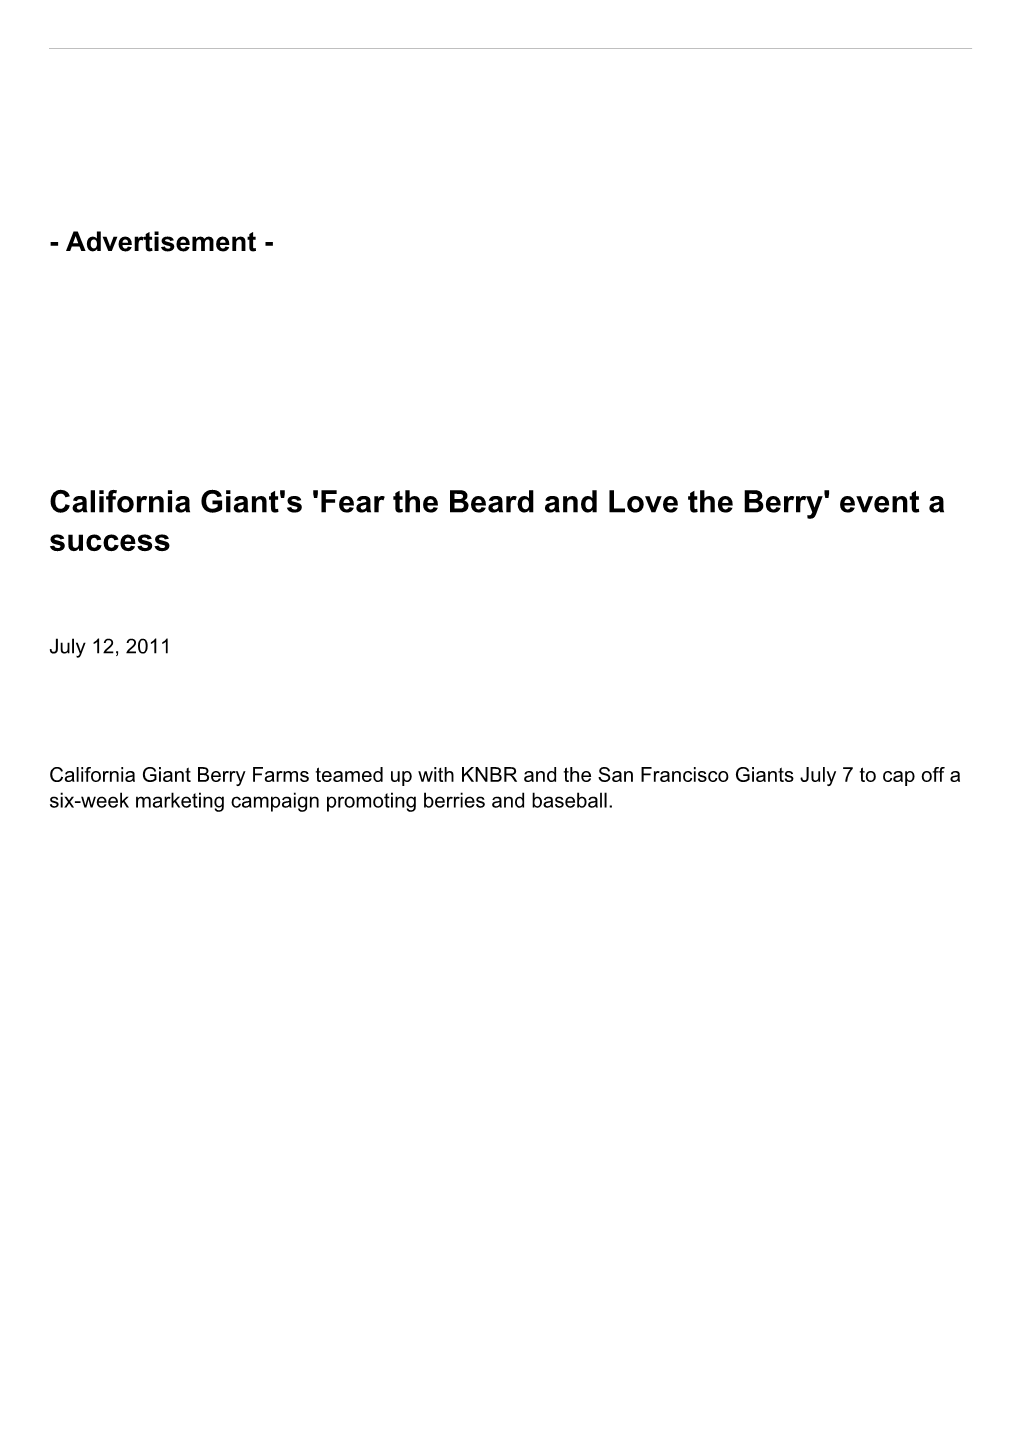 California Giant's 'Fear the Beard and Love the Berry' Event a Success